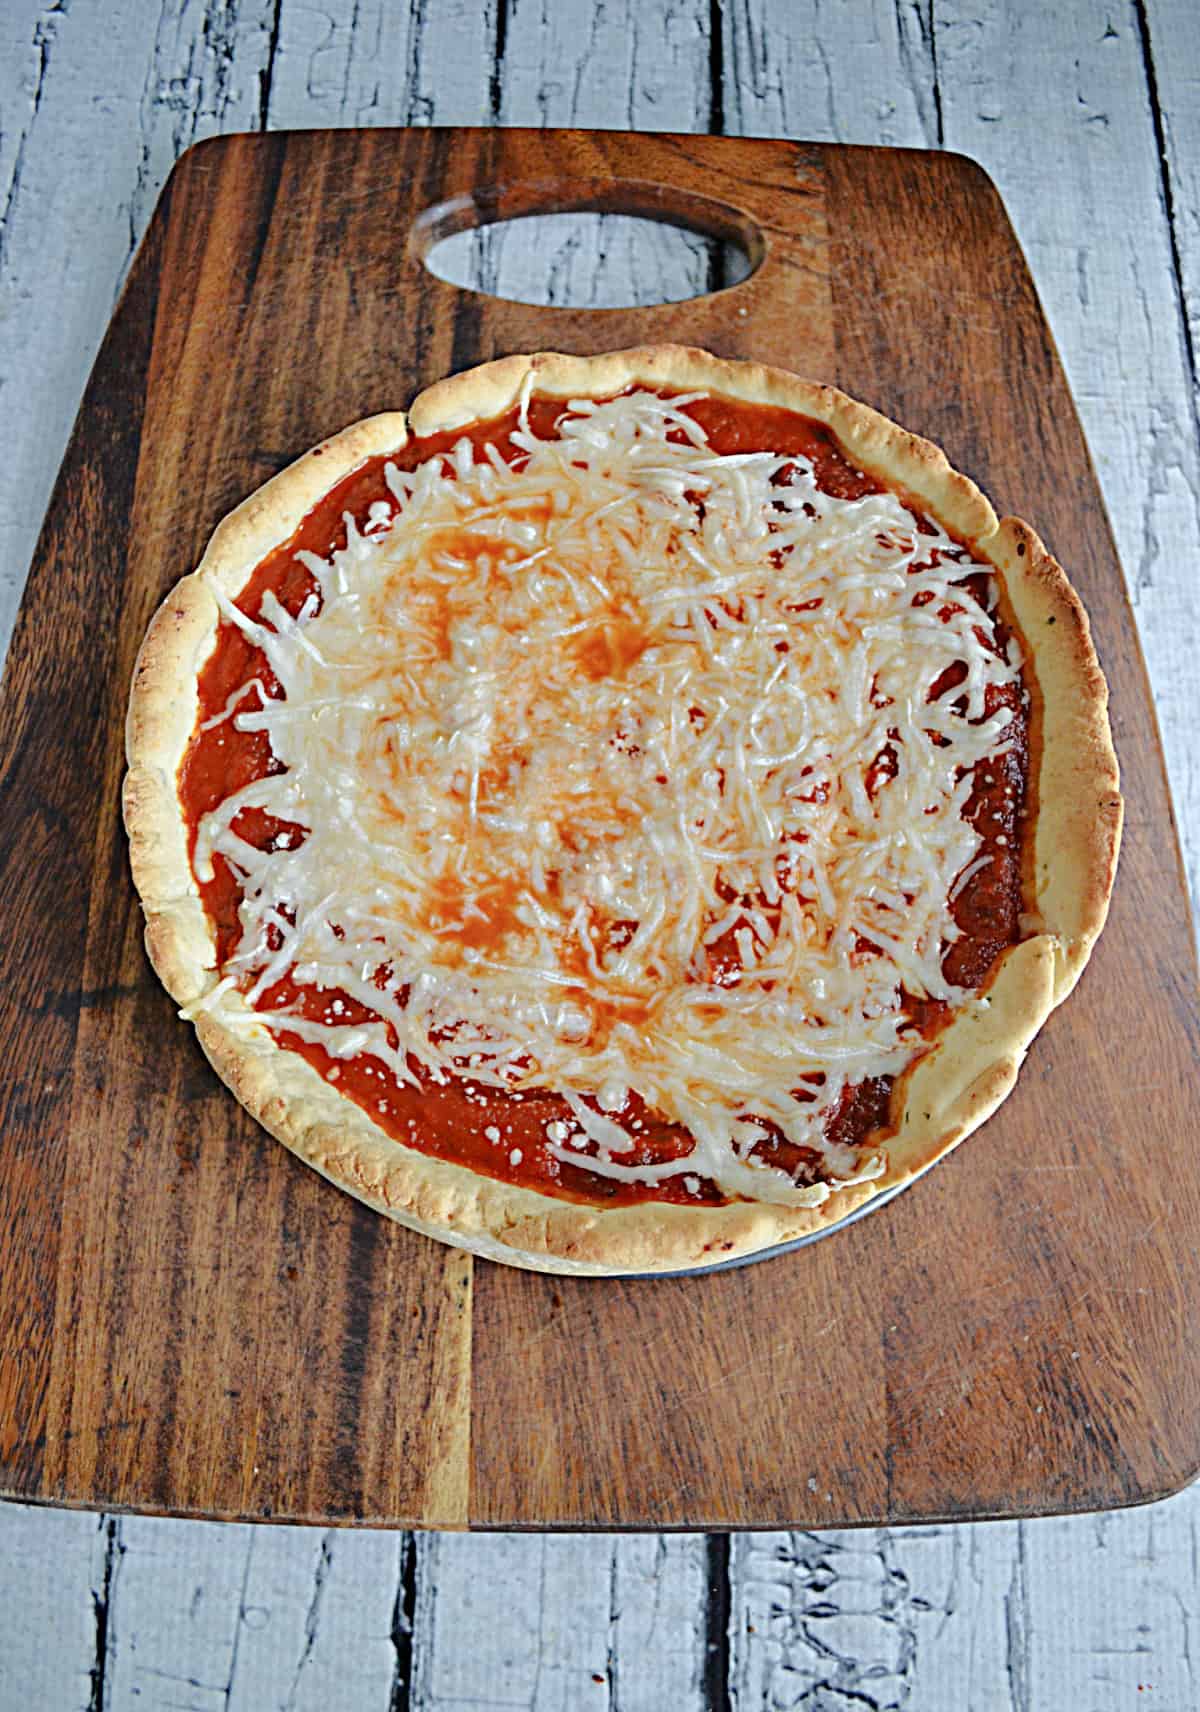 A baked deep dish pizza with cheese on top.